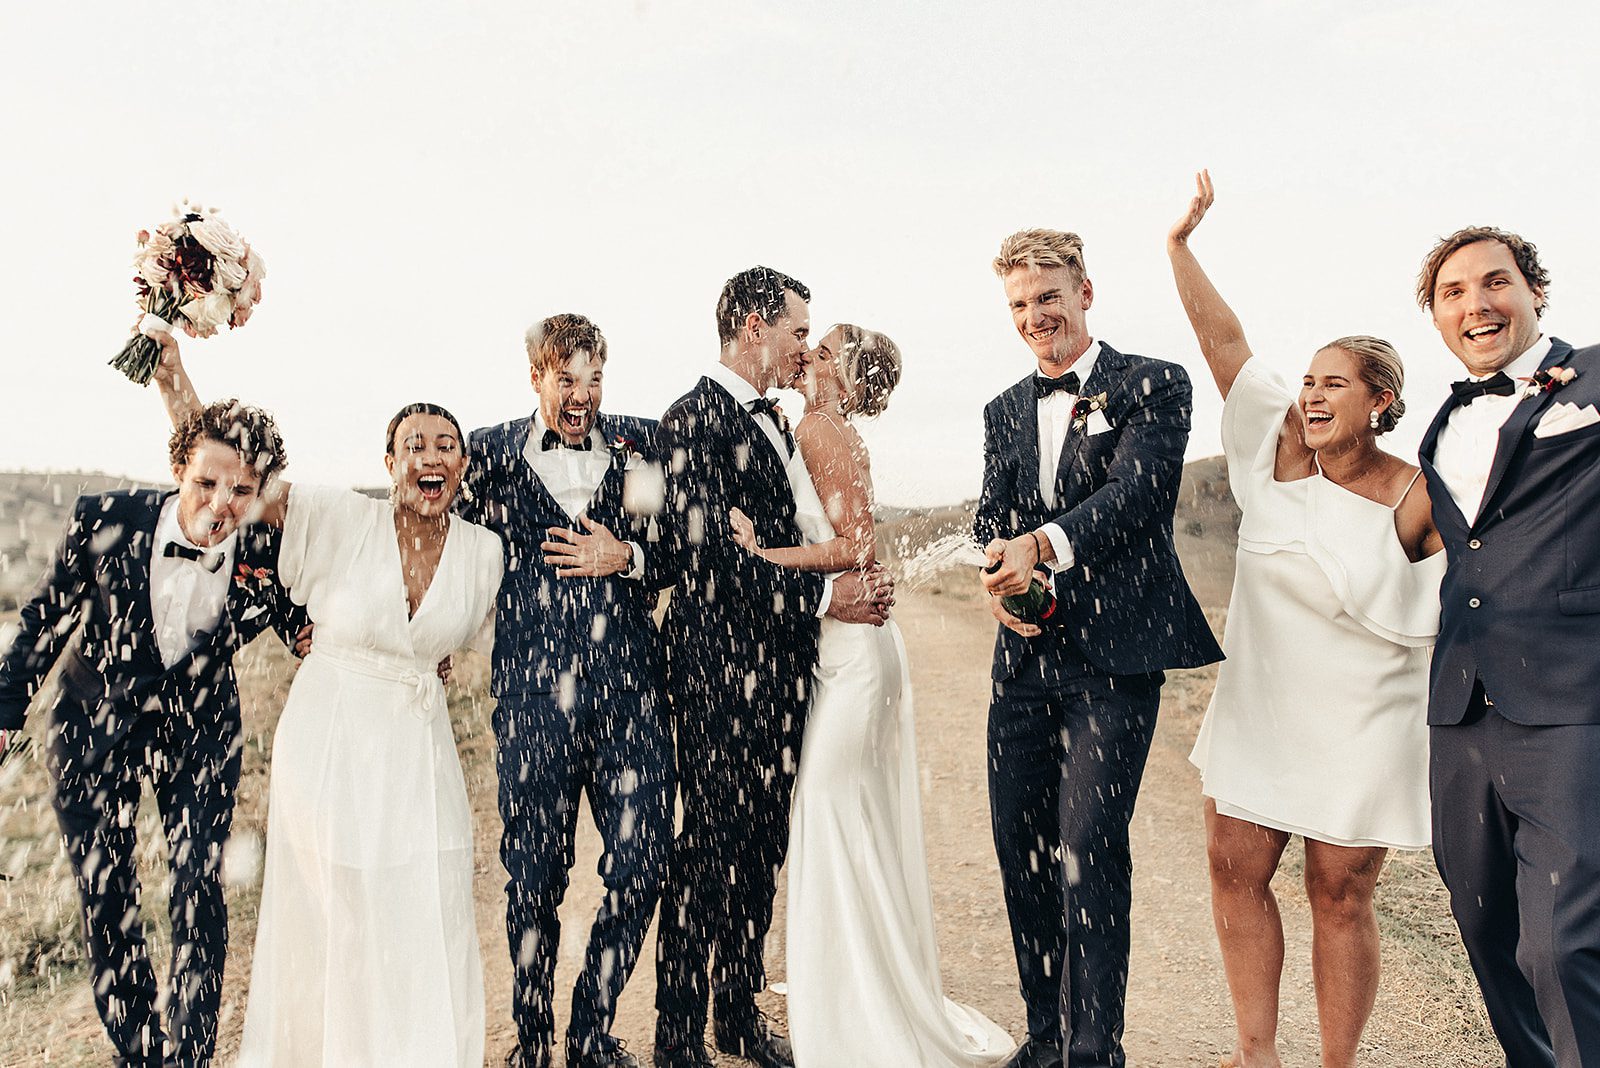 A bridal party in full celebration mode. Champagne is flowing in the air as the bride and groom Kiss passionately, their bridal party is having fun in this scene.